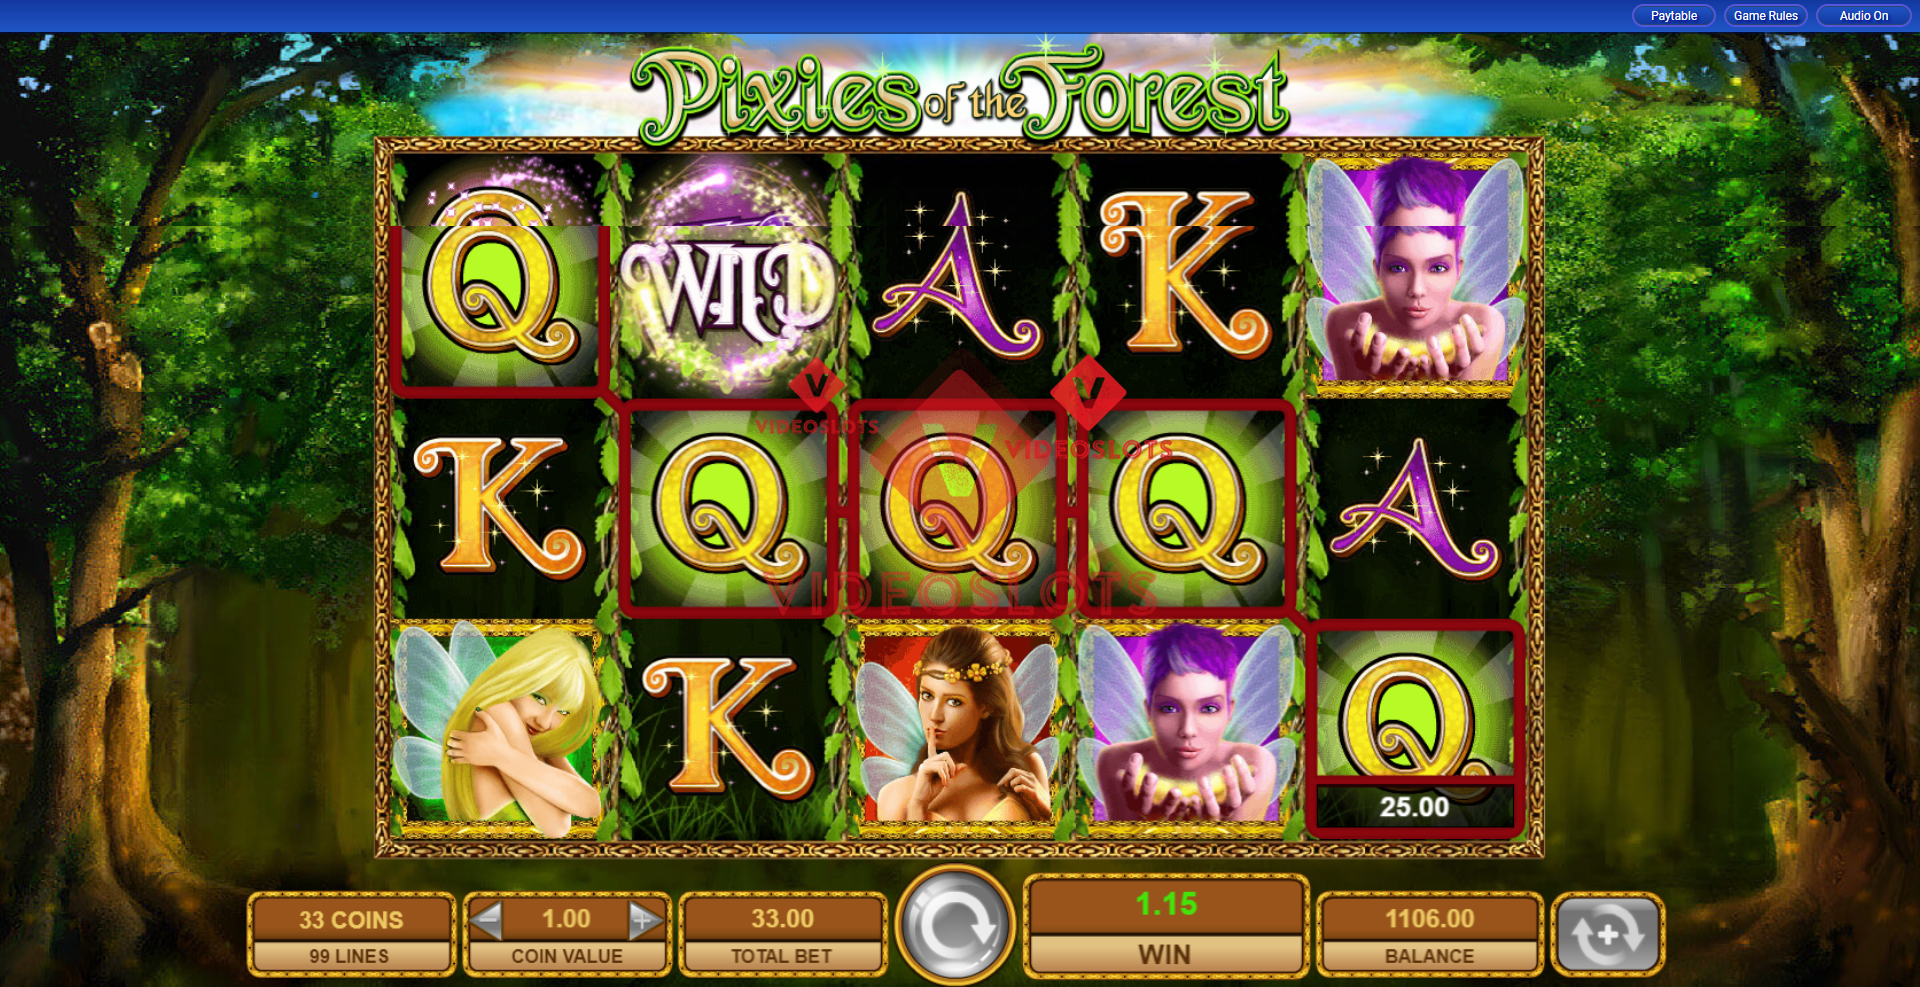 Base Game for Pixies of the Forest slot from IGT